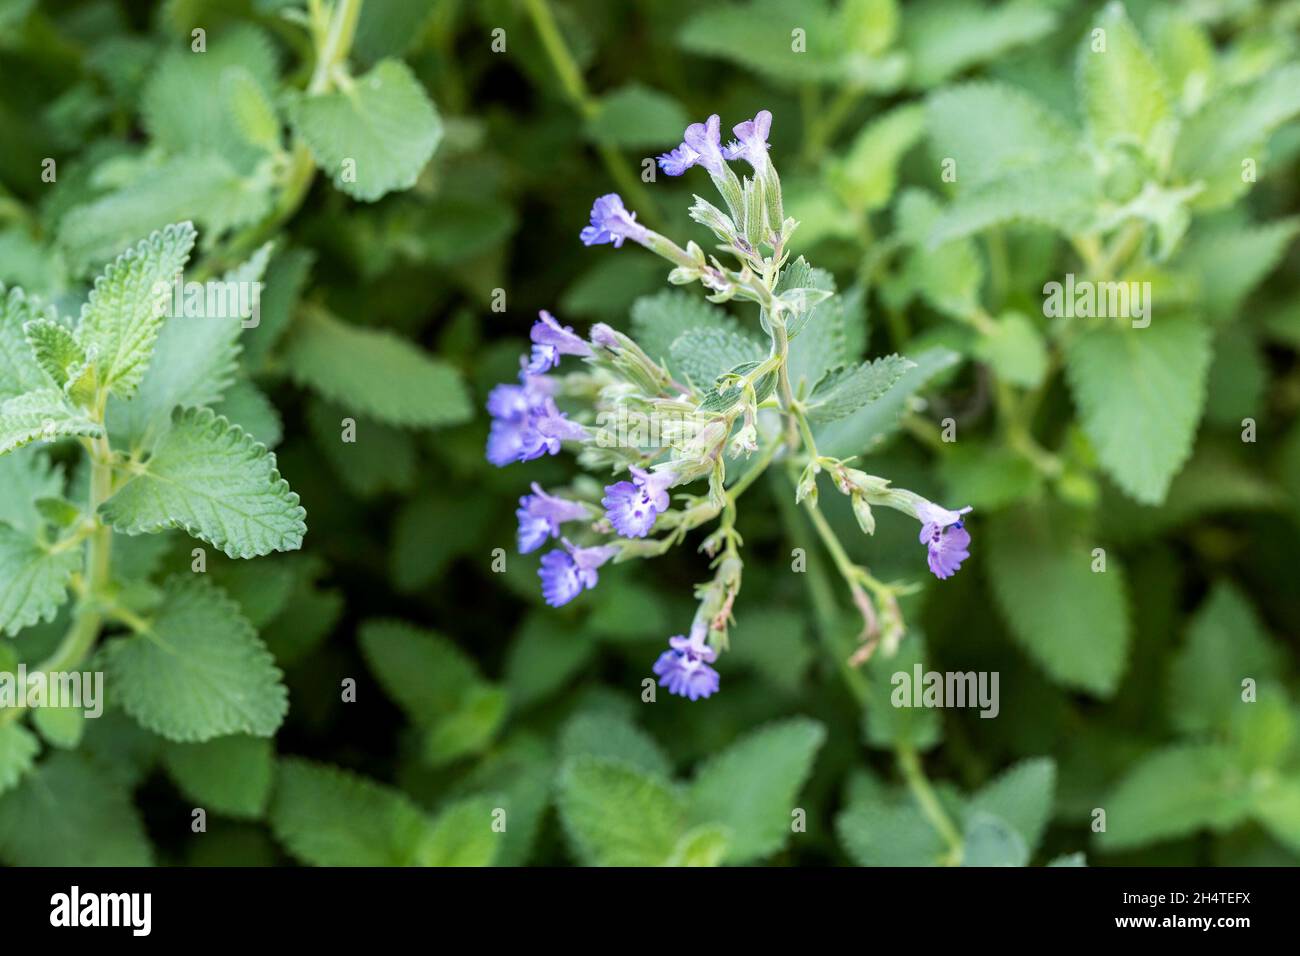 Single catmint flower cluster, Nepeta x faassenii, beginning to bloom in the spring. Kansas, USA. Stock Photo